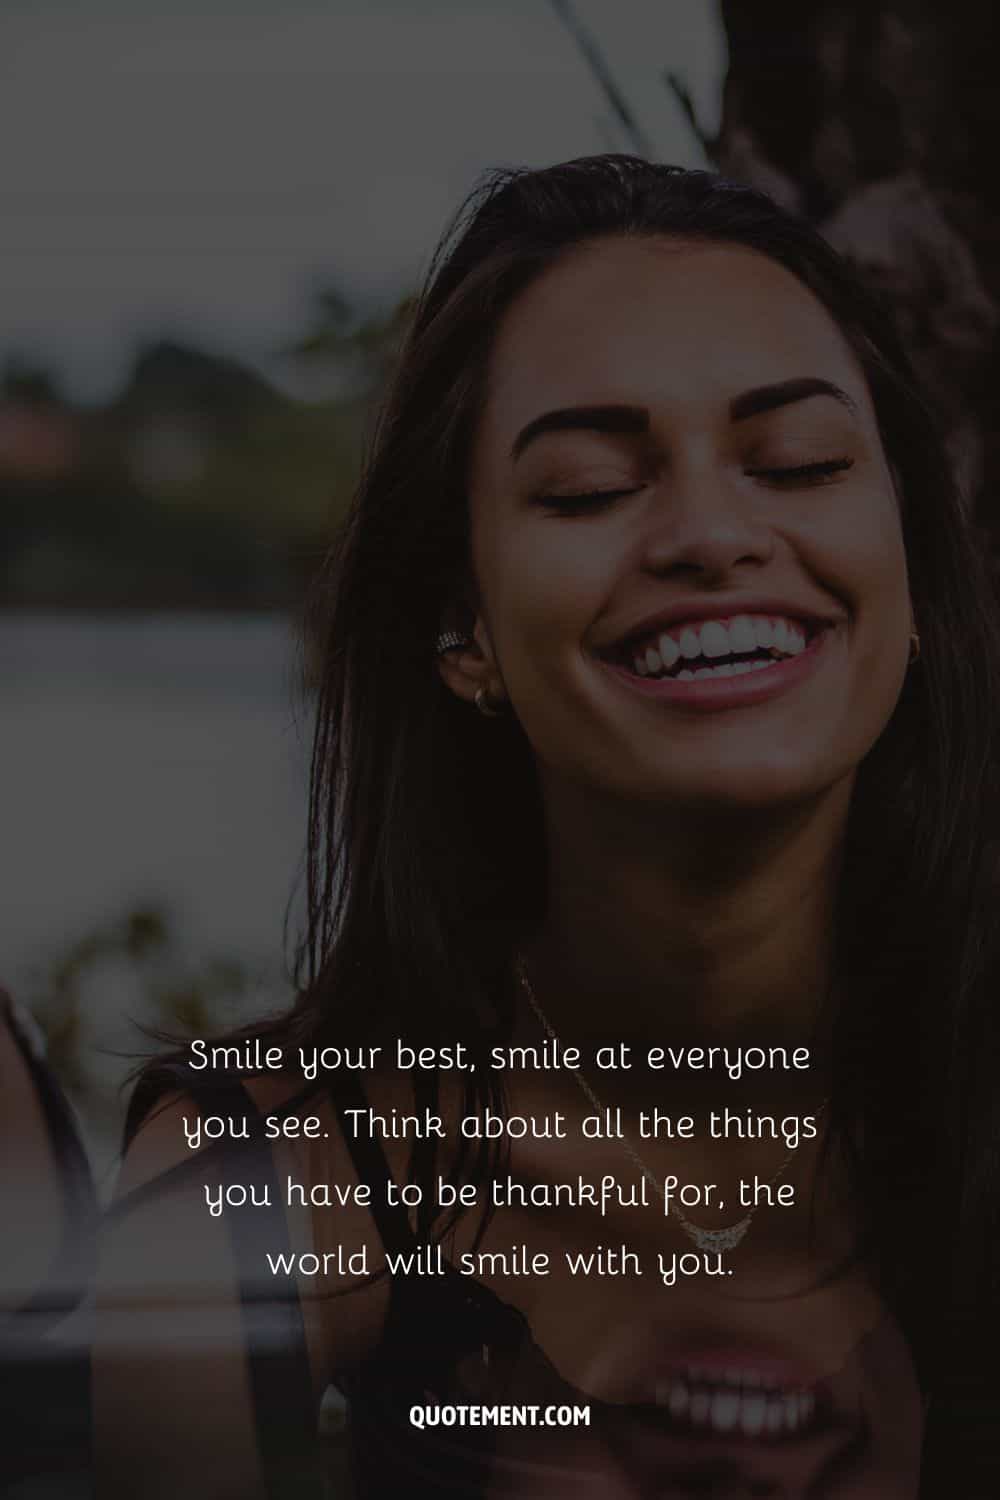 a beautiful girl with a bright smile representing smile pic captions